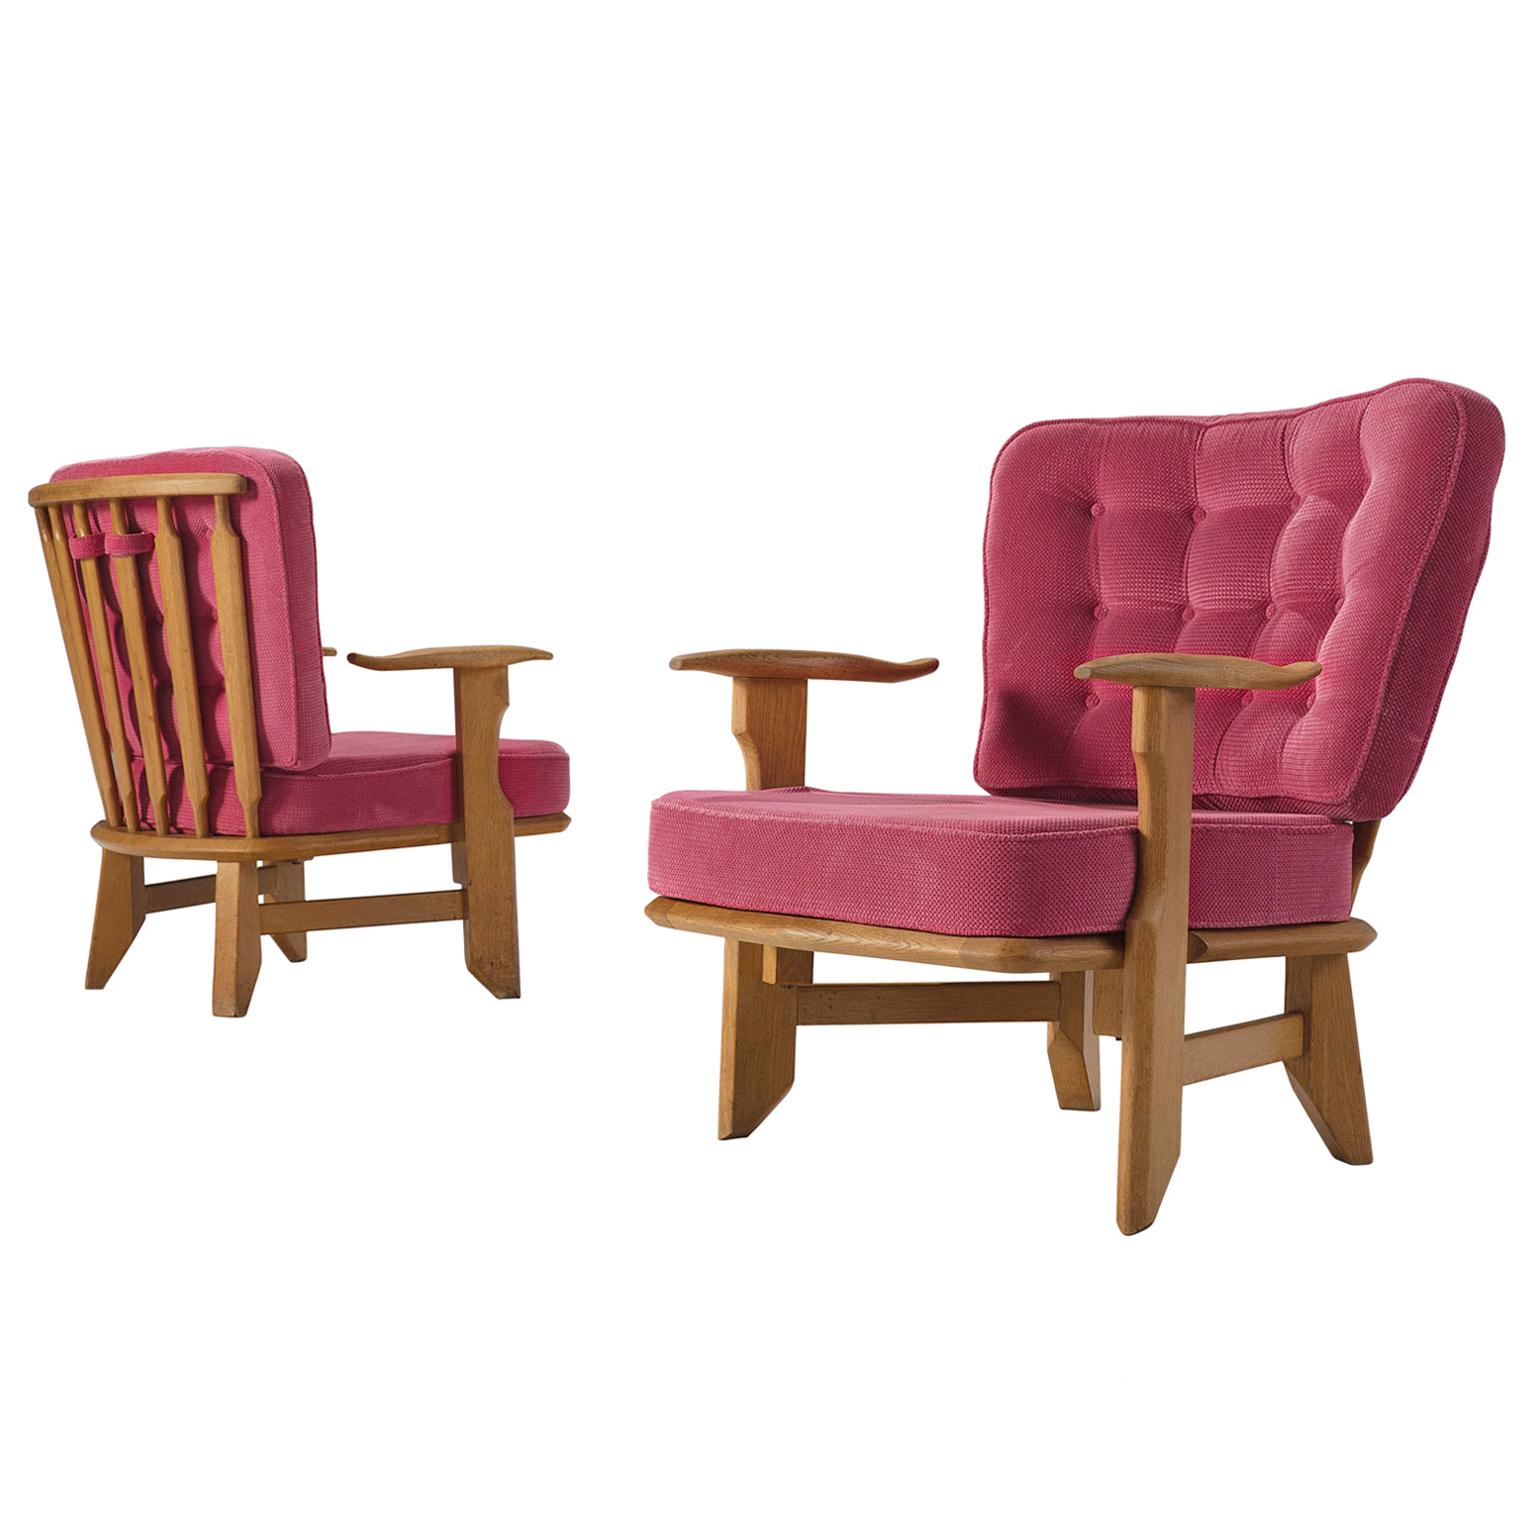 Guillerme et Chambron Pair of Solid Oak Armchairs in Pink Upholstery